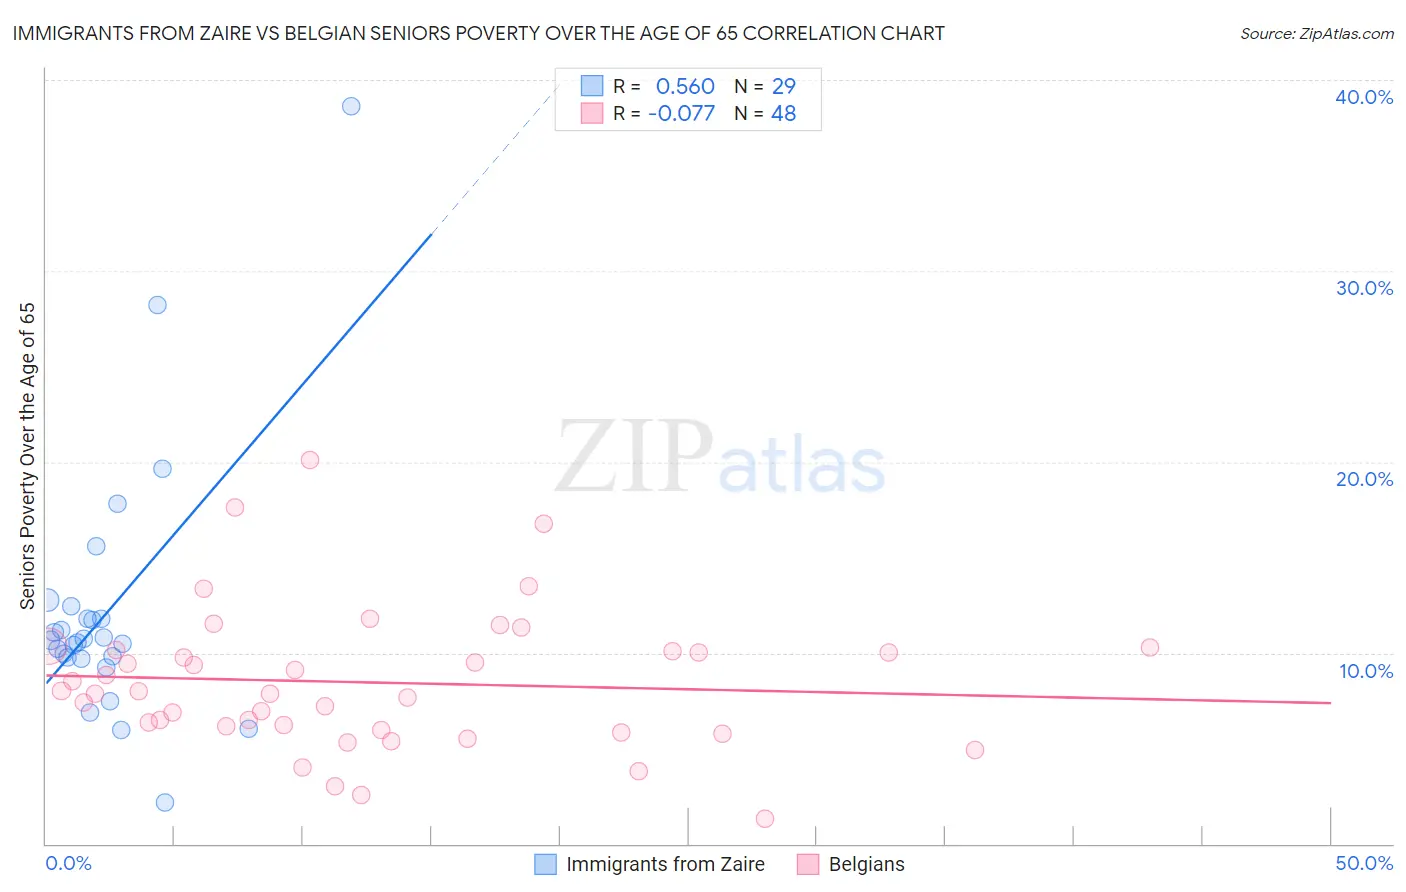 Immigrants from Zaire vs Belgian Seniors Poverty Over the Age of 65